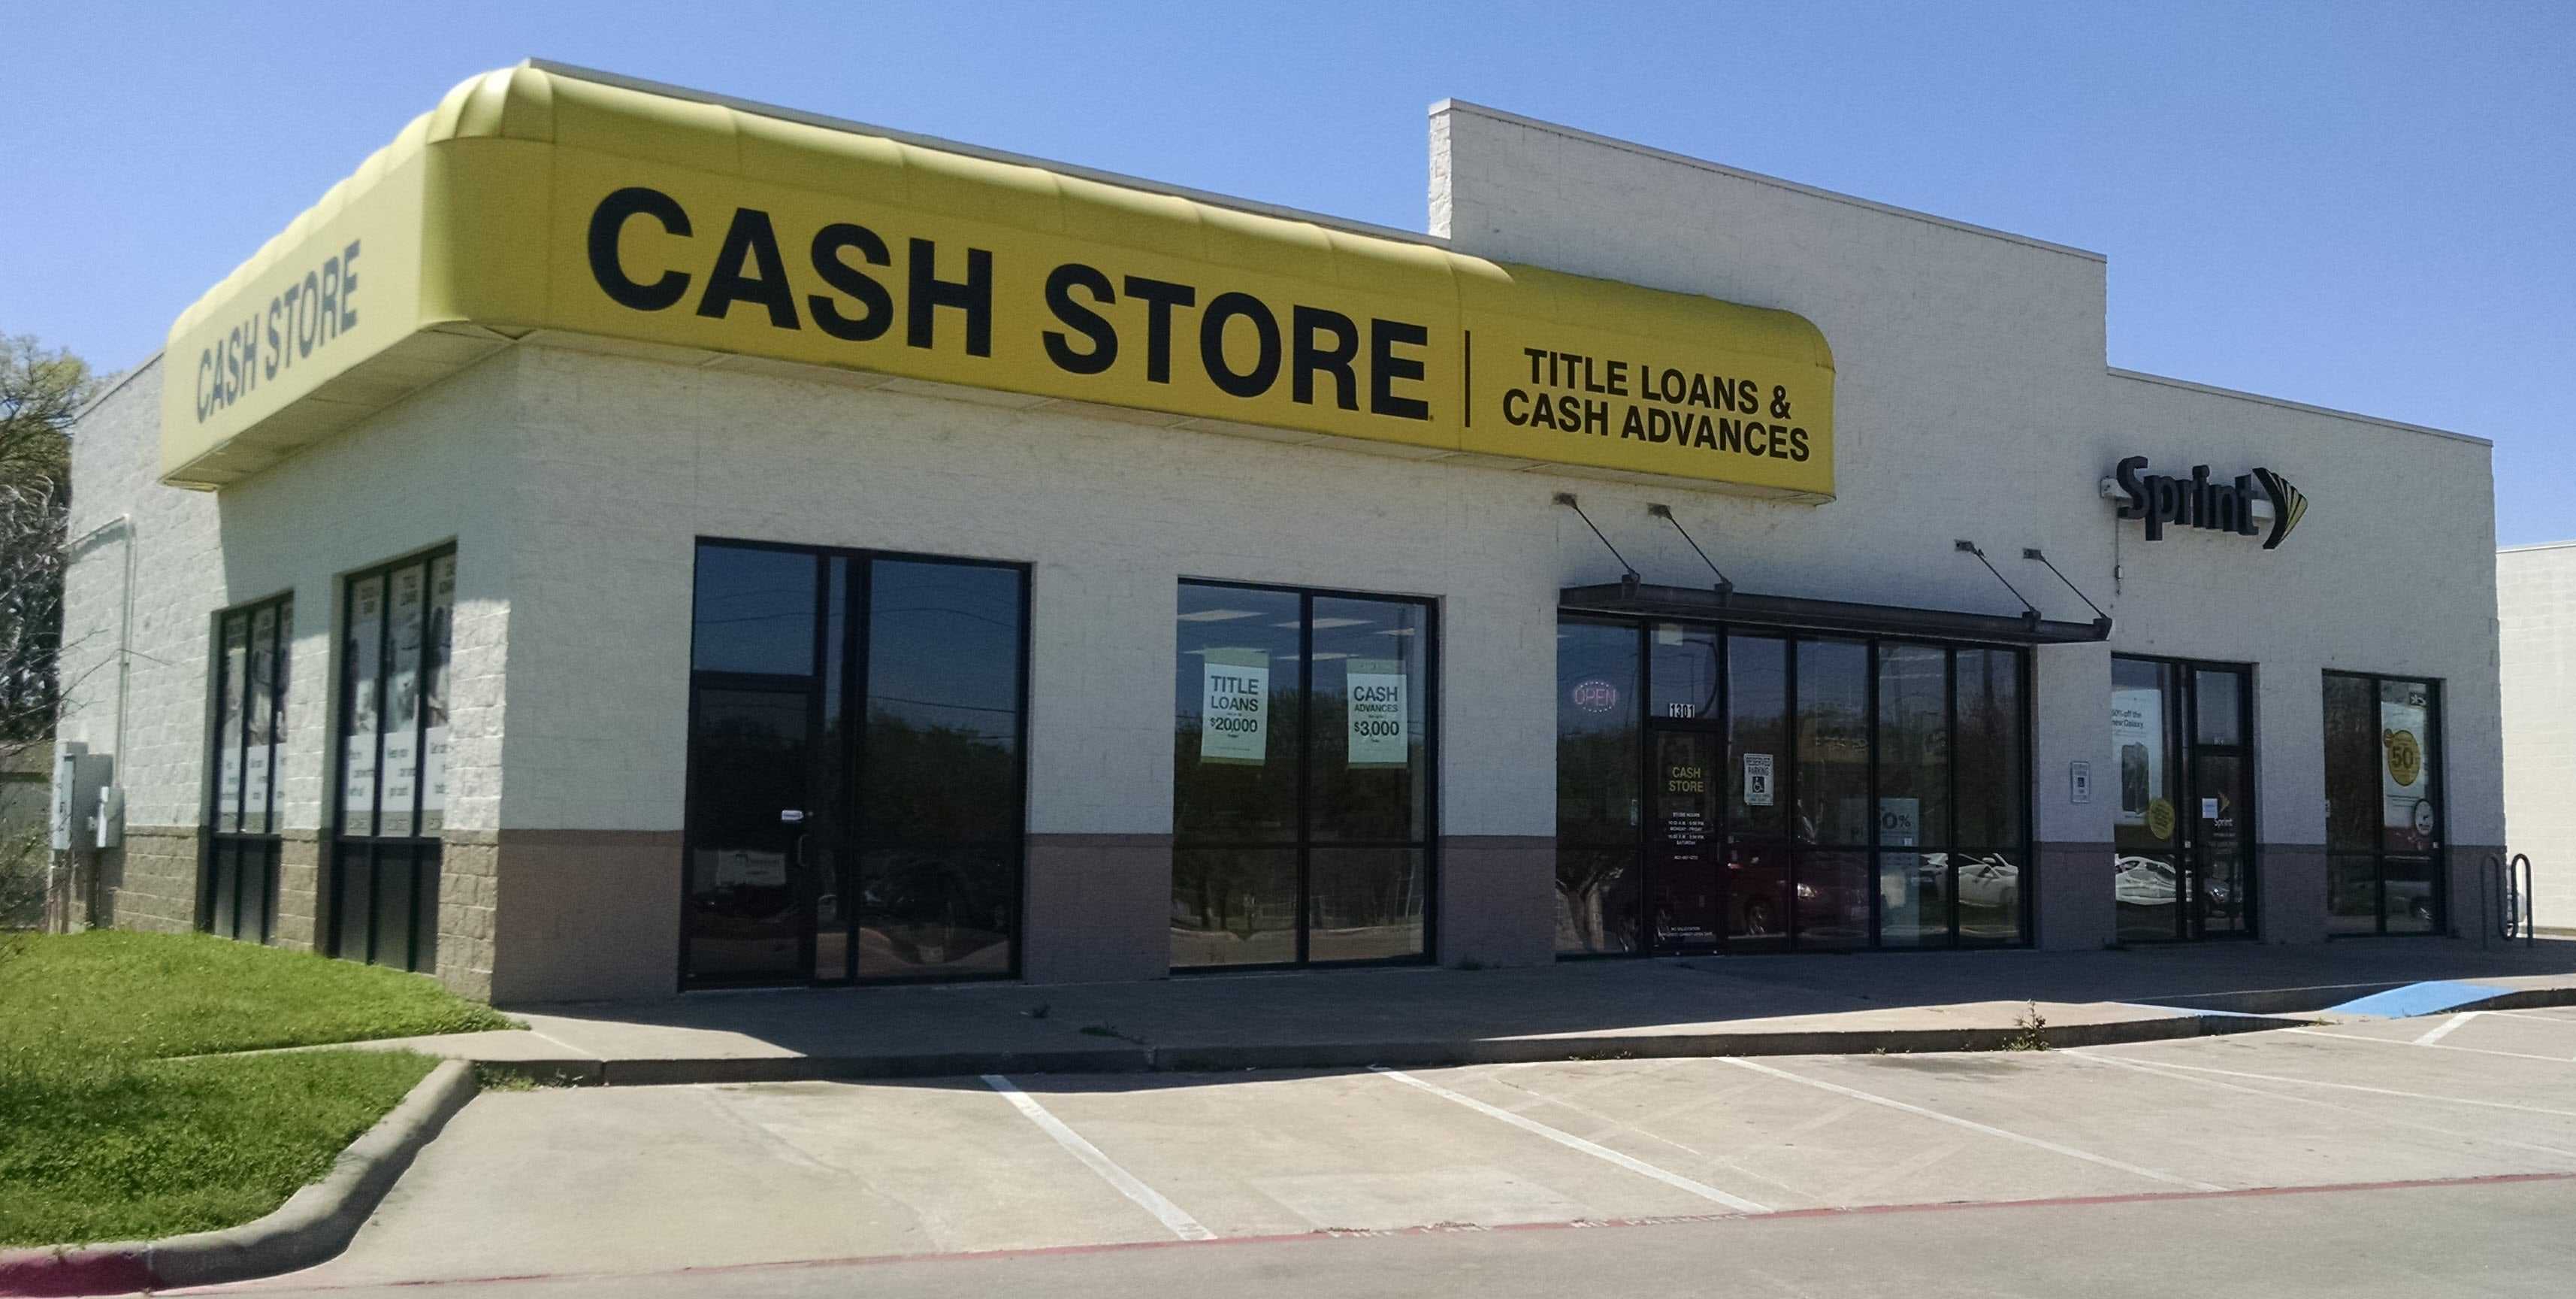 The Cash Store -  #7169